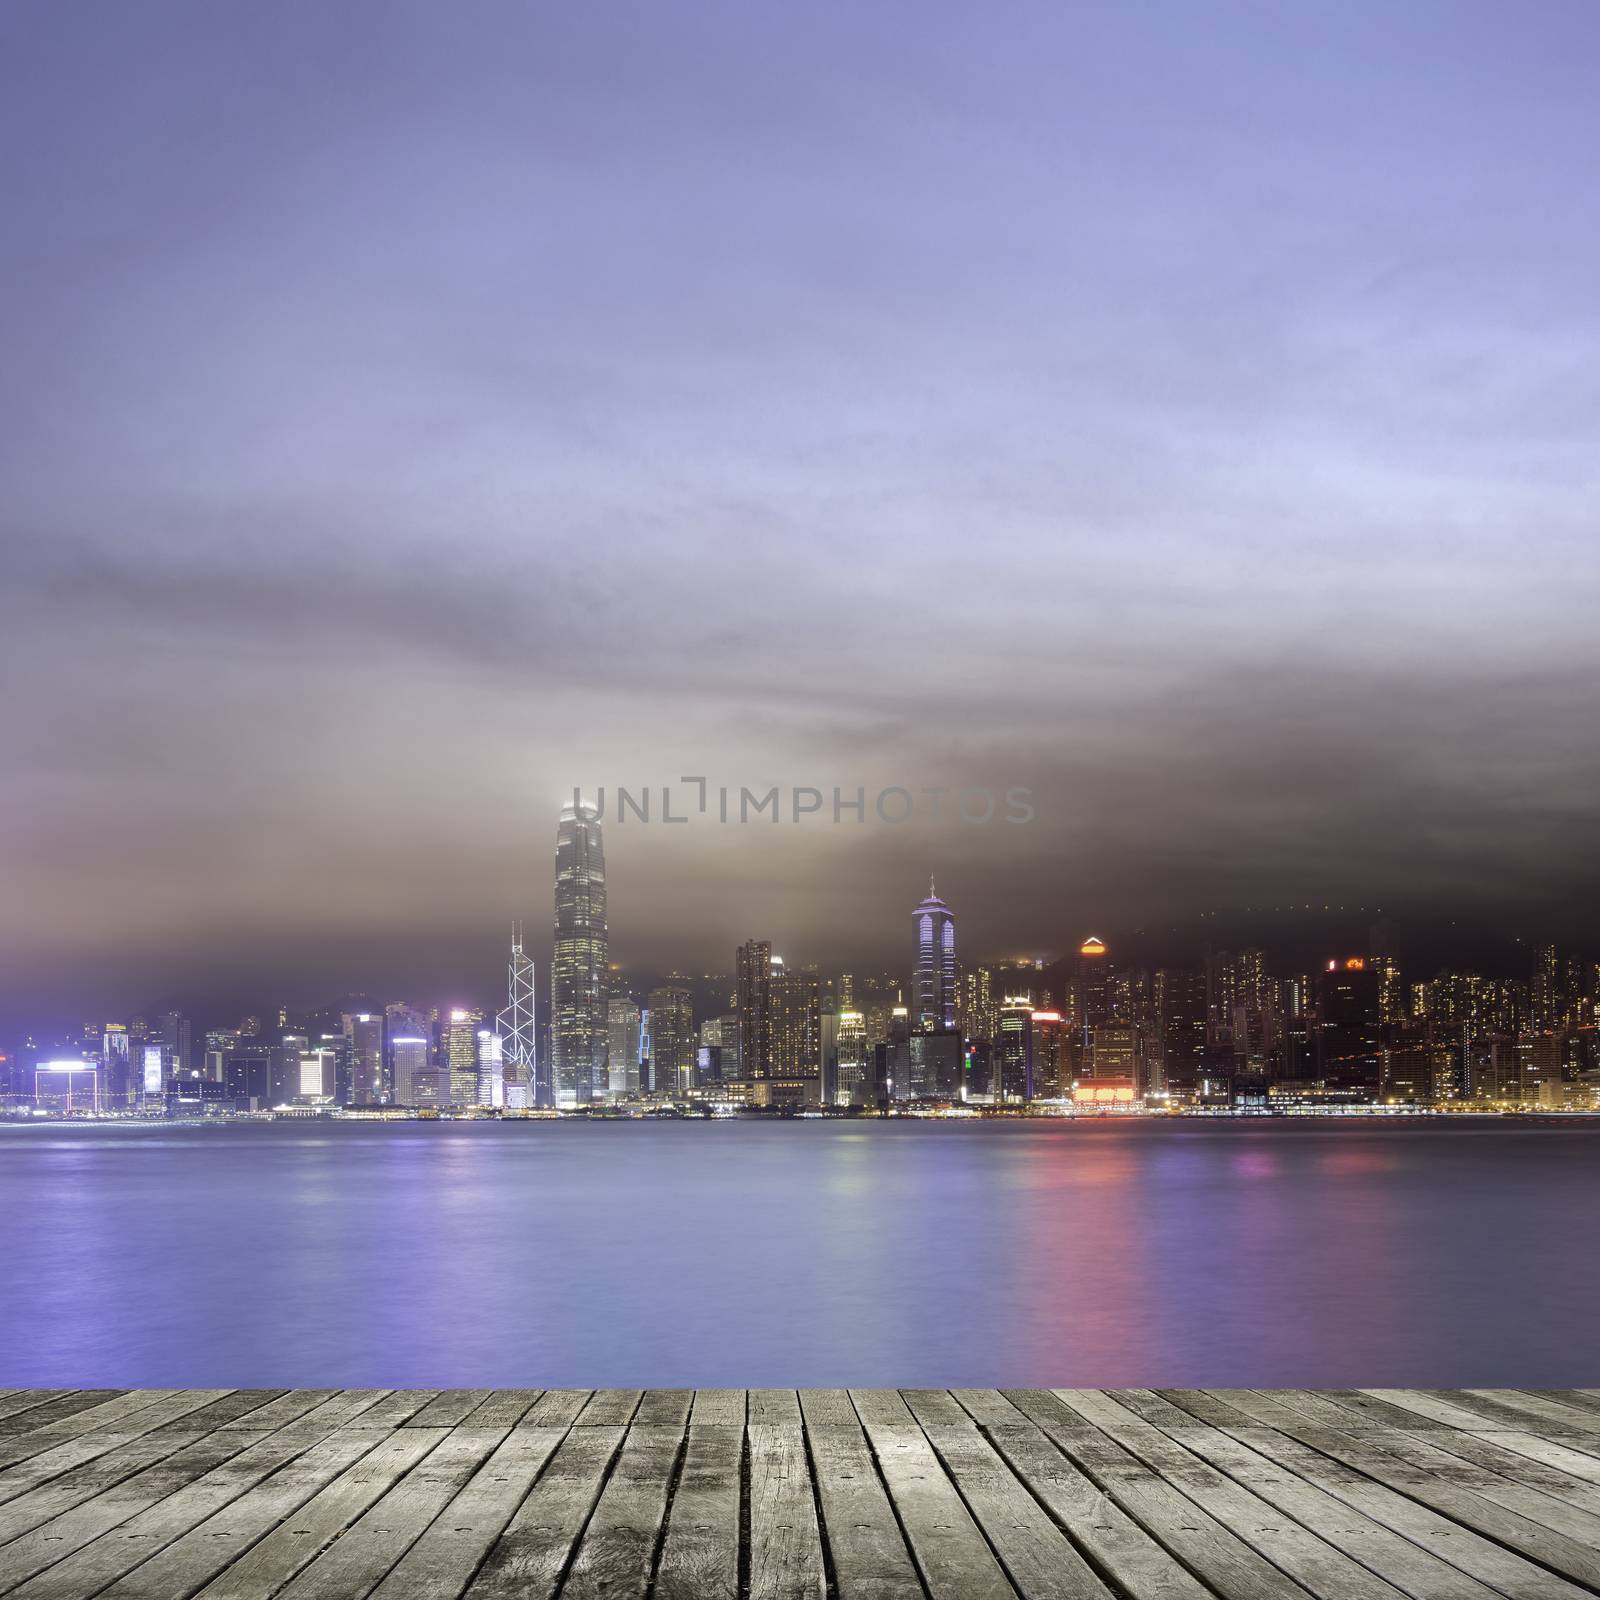 City night scenes of Victoria harbor in Hong Kong with copyspace on heaven.